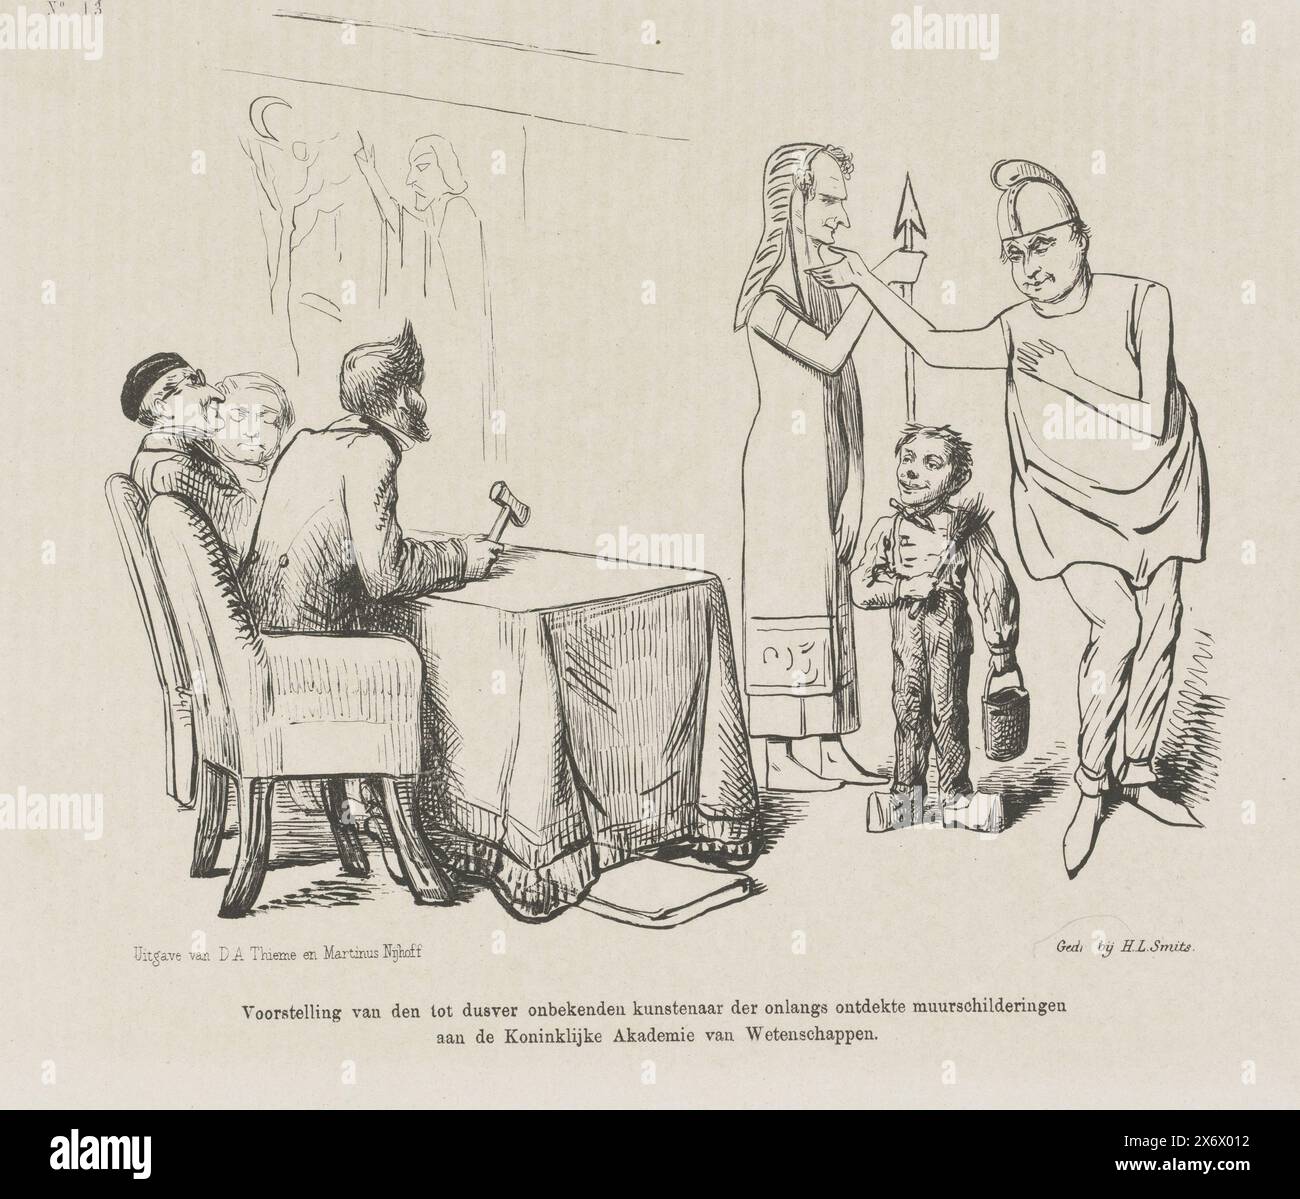 Cartoon on the board of the Royal Academy of Sciences, 1860, Presentation of the hitherto unknown artist of the recently discovered murals at the Royal Academy of Sciences, Cartoon in which a dyer boy is presented as an artist to the board of the Royal (Dutch) Academy of Sciences Sciences. The board, seated on the left, consists of J. de Wal, H.J. Koenen and R.C. Bakhuizen van den Brink. The boy accompanied by C. Leemans and L.J. Jansen. Plate published in the weekly magazine De Nederlandsche Spectator, no. 13, March 31, 1860., print, print maker: Johan Michaël Schmidt Crans, after design by Stock Photo